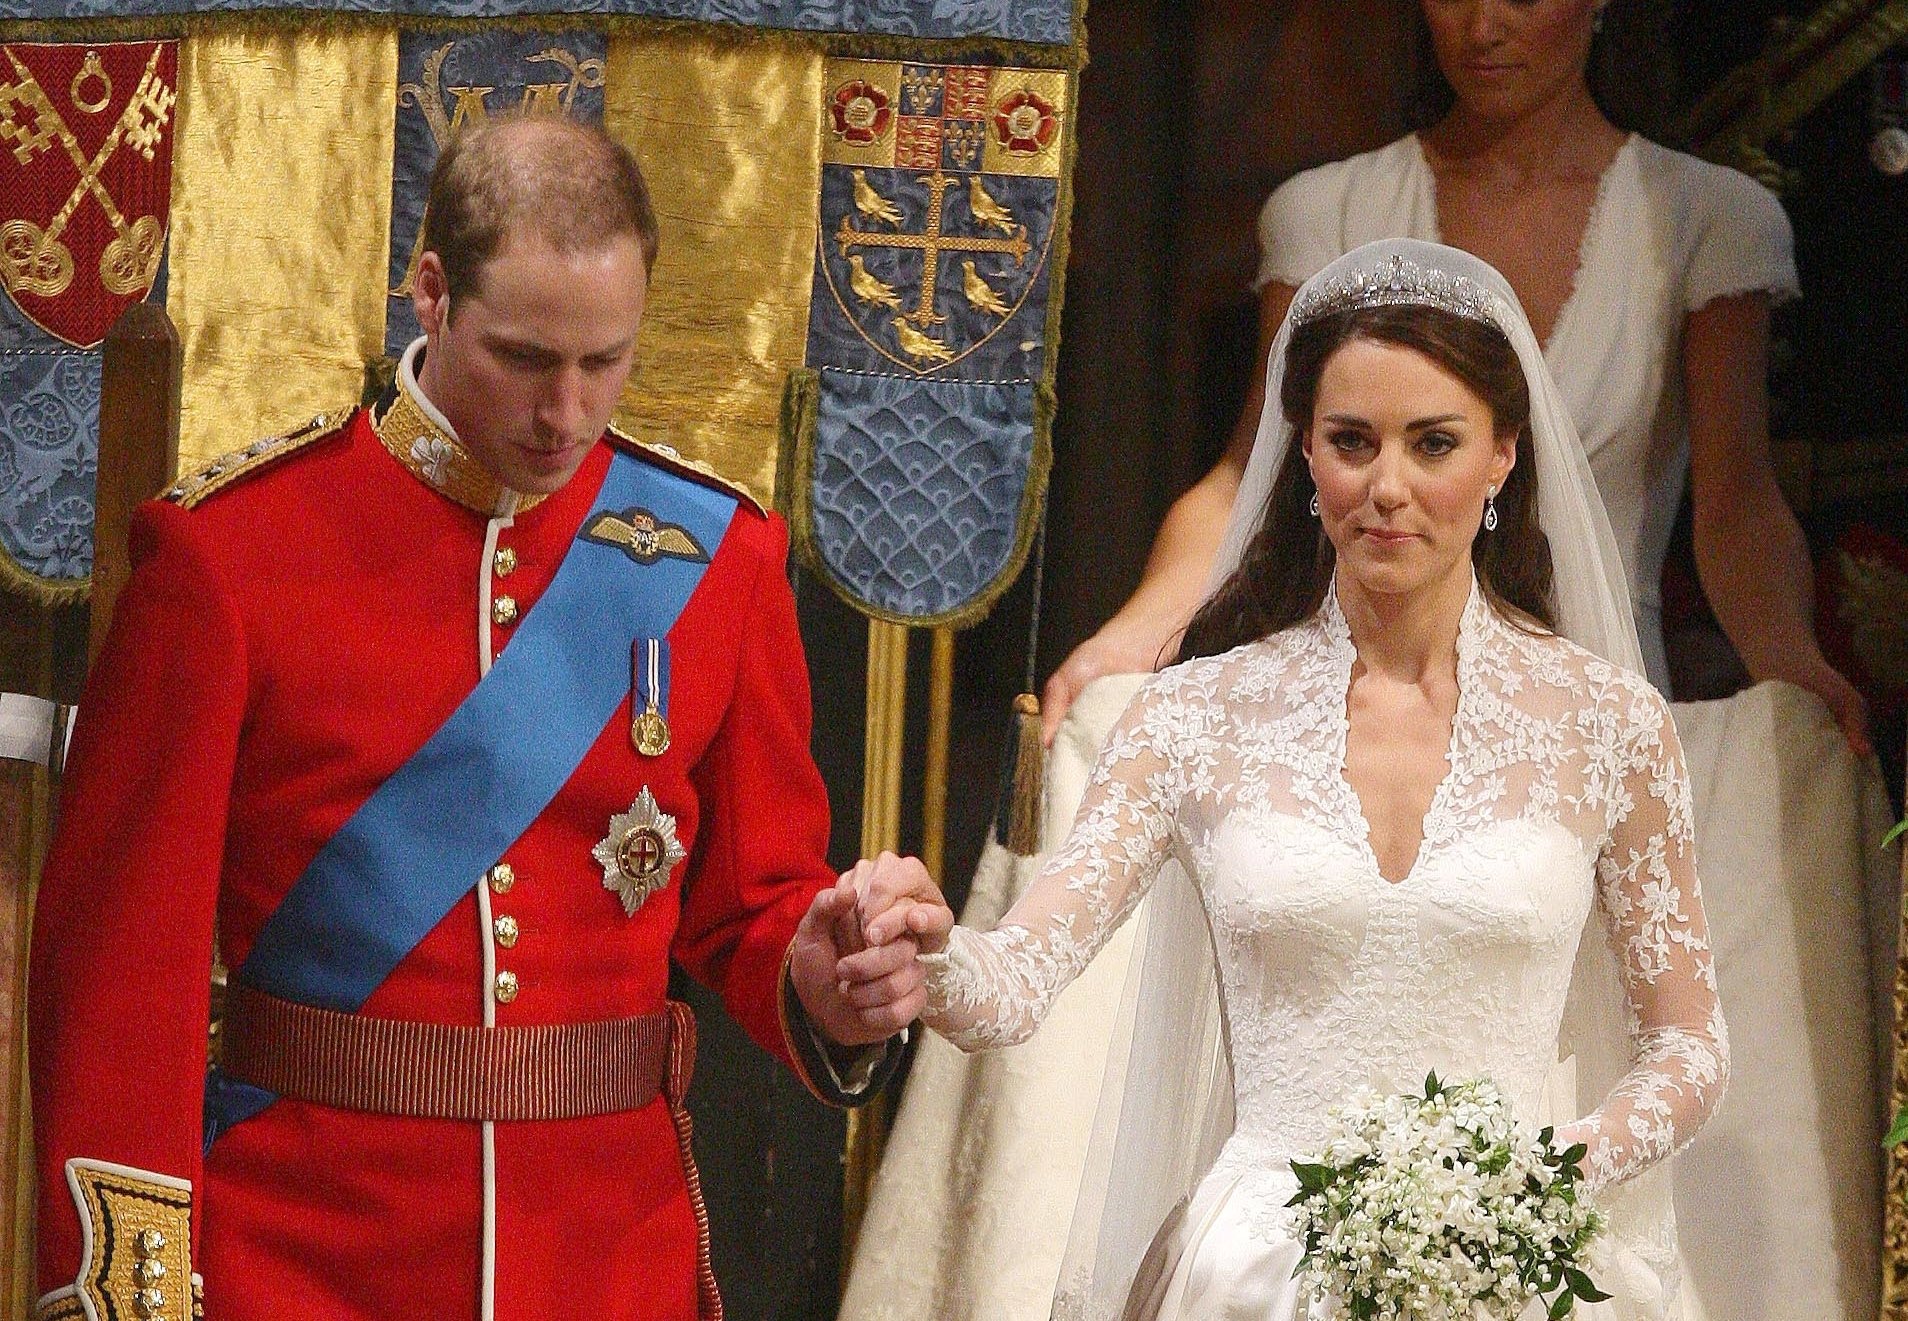 Prince William and Kate Middleton, who was in tears before her wedding, leaving Westminster Abbey after getting married